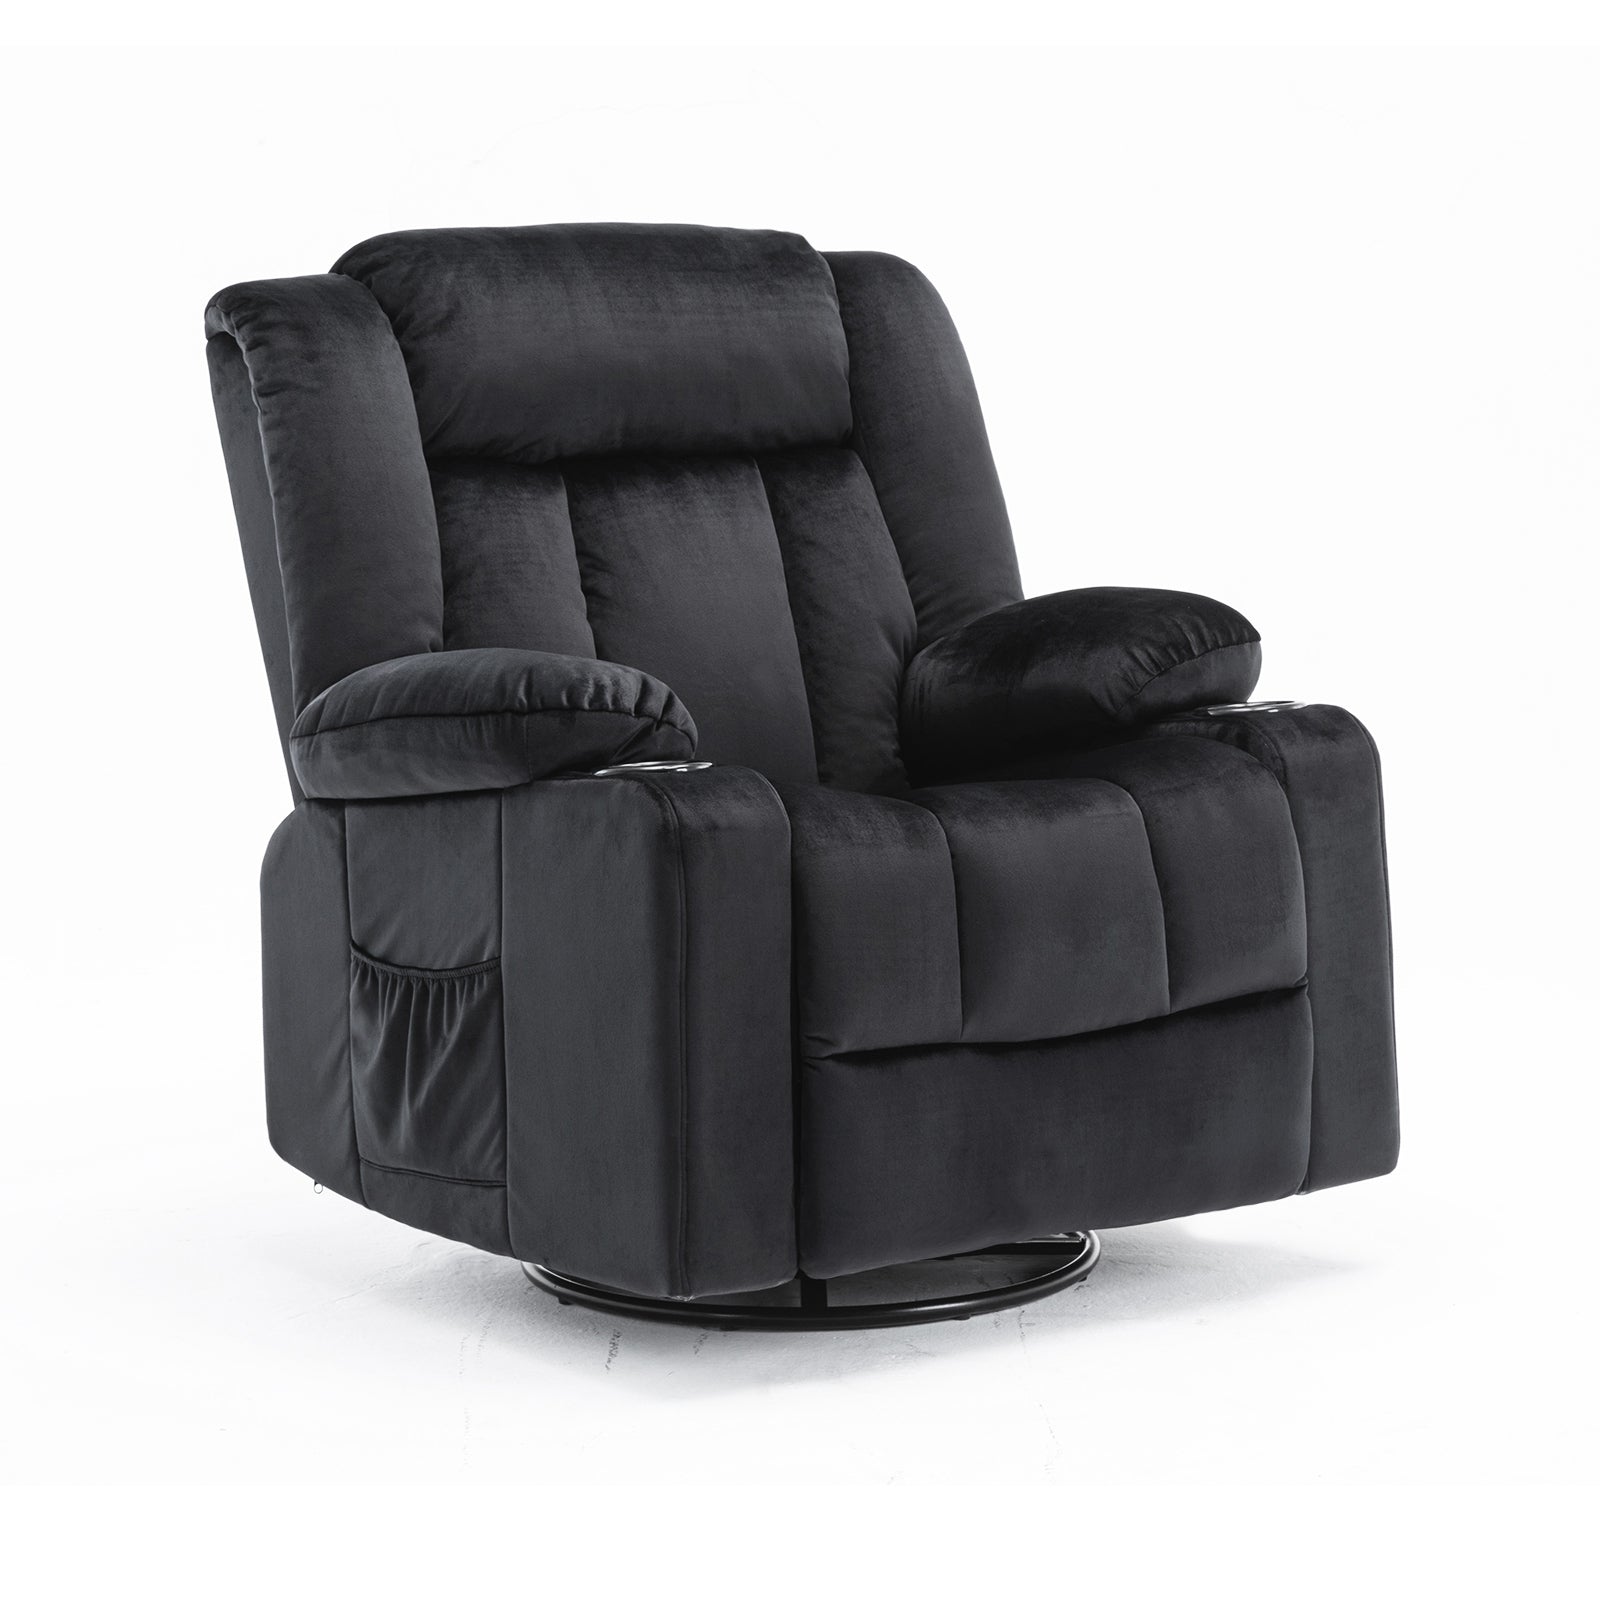 Recliner Chair GT1148 - GTRACING